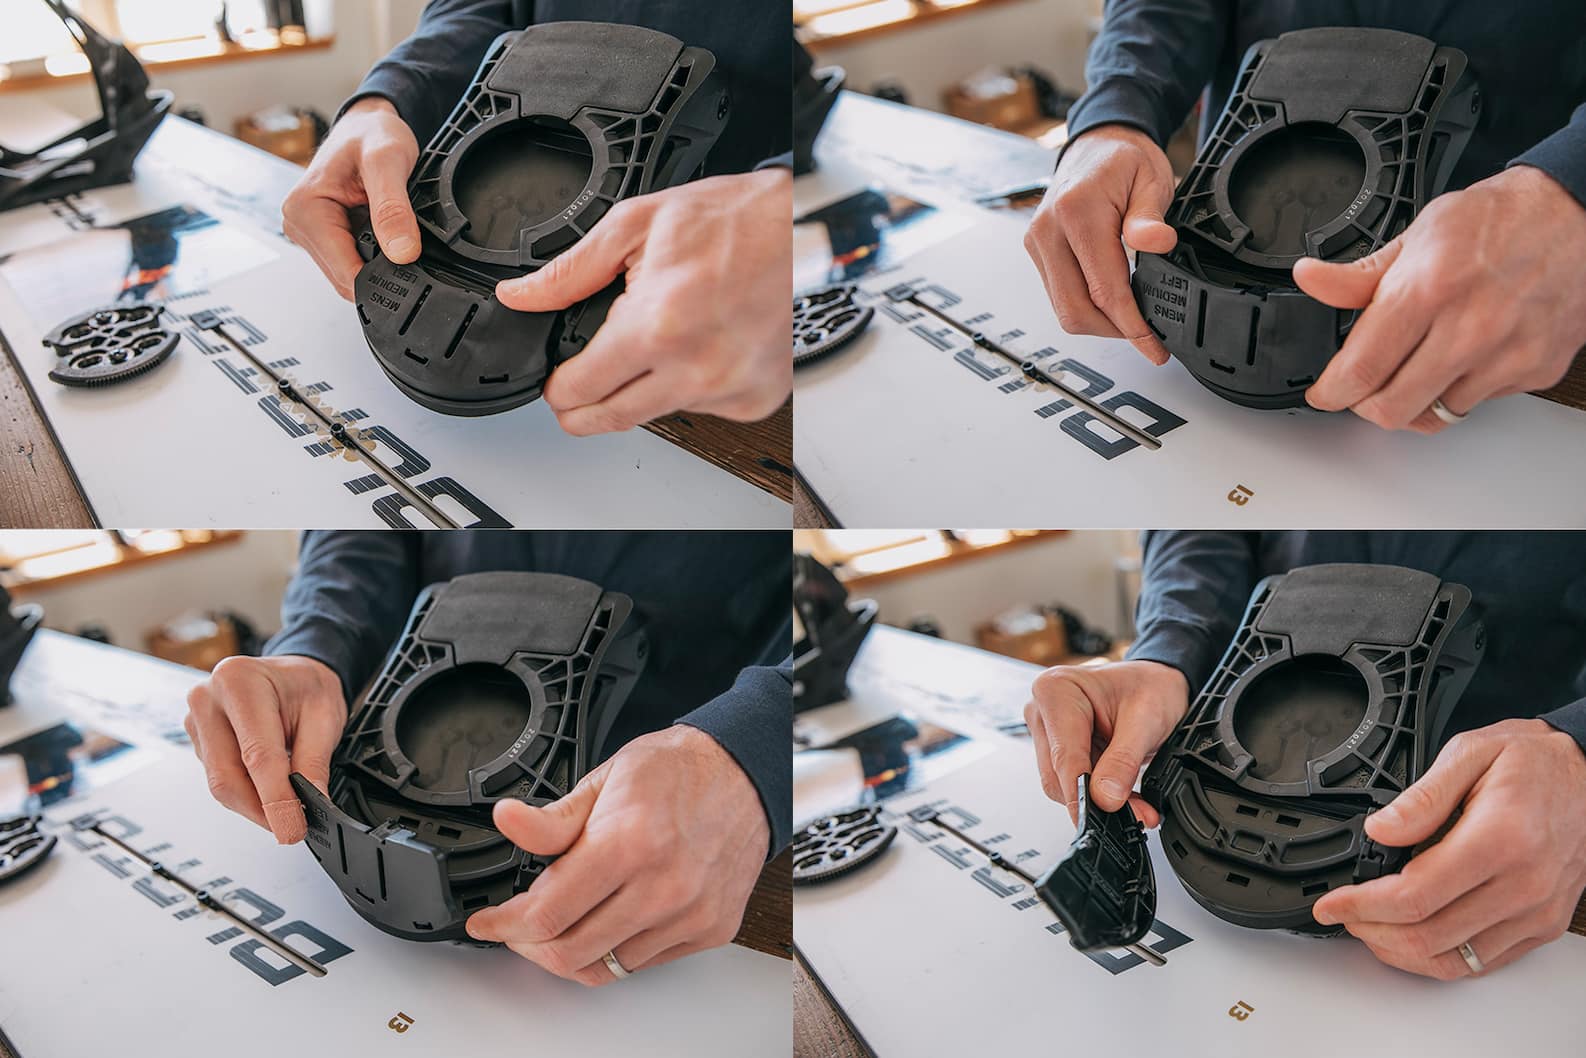 How to Replace Burton Step On Binding Gas Pedals | Burton Snowboards